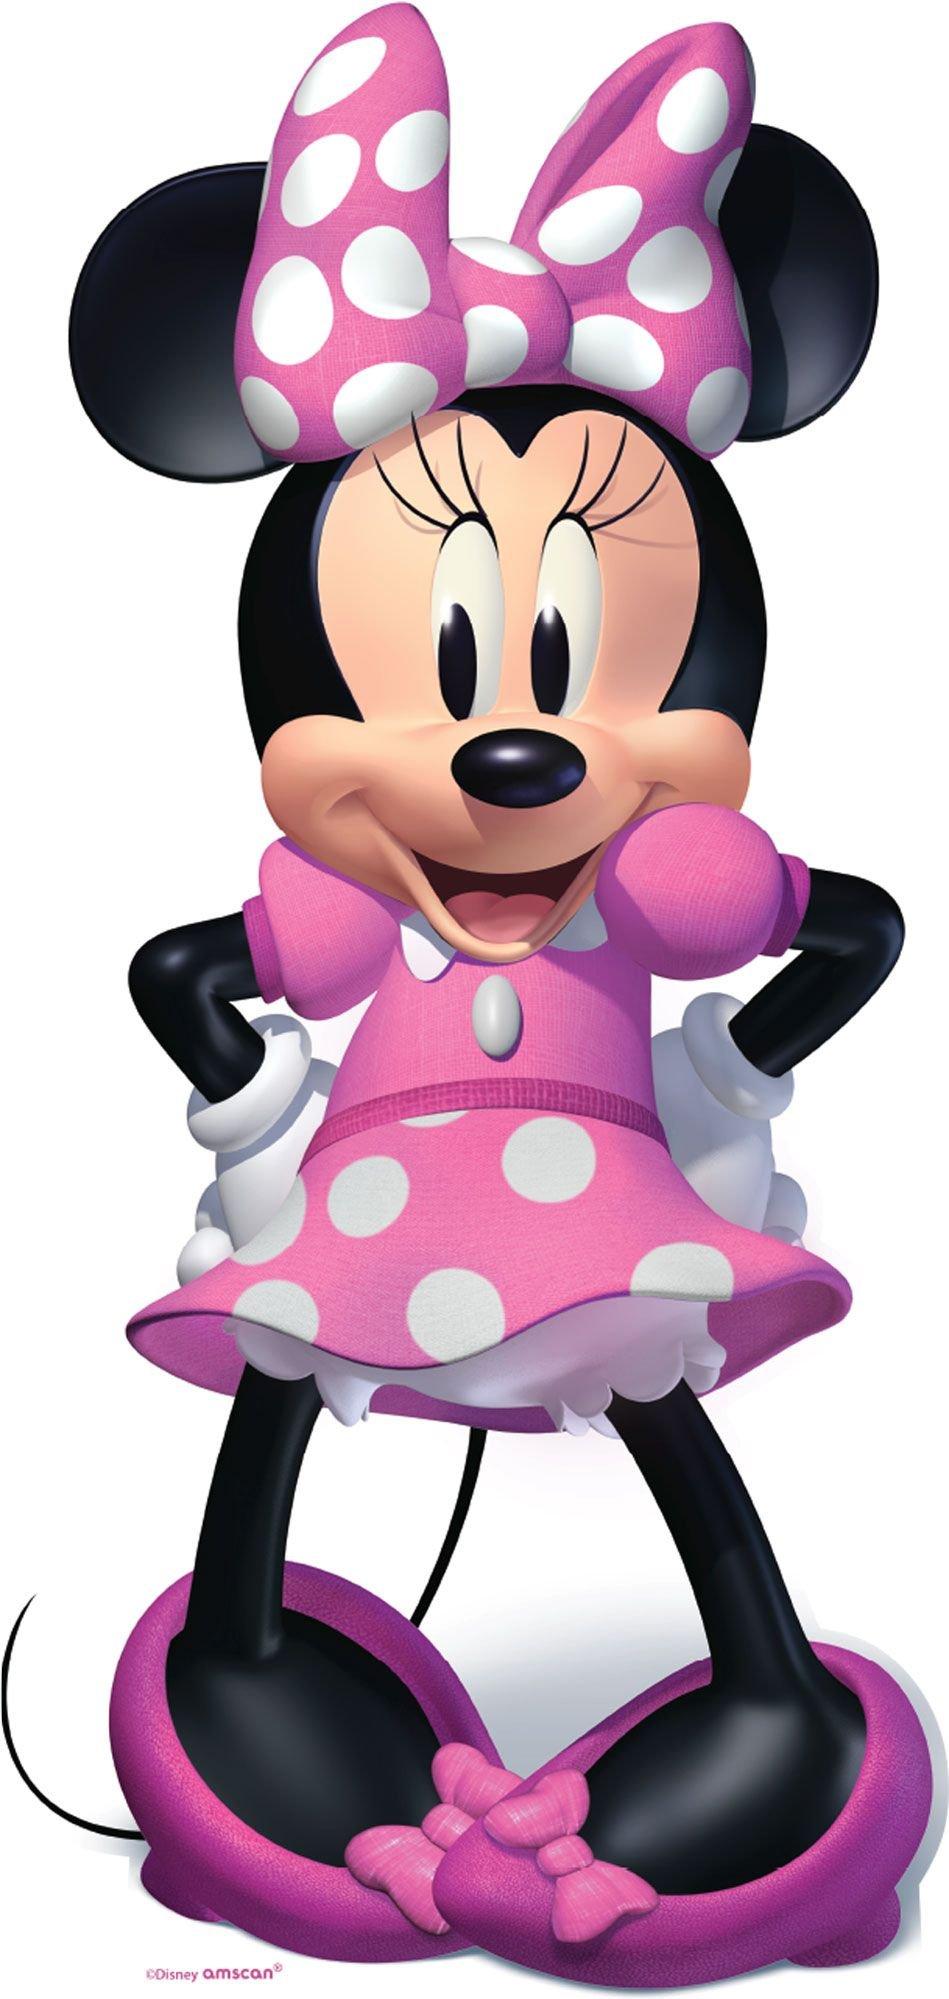 Minnie Mouse Forever Cardboard Cutout